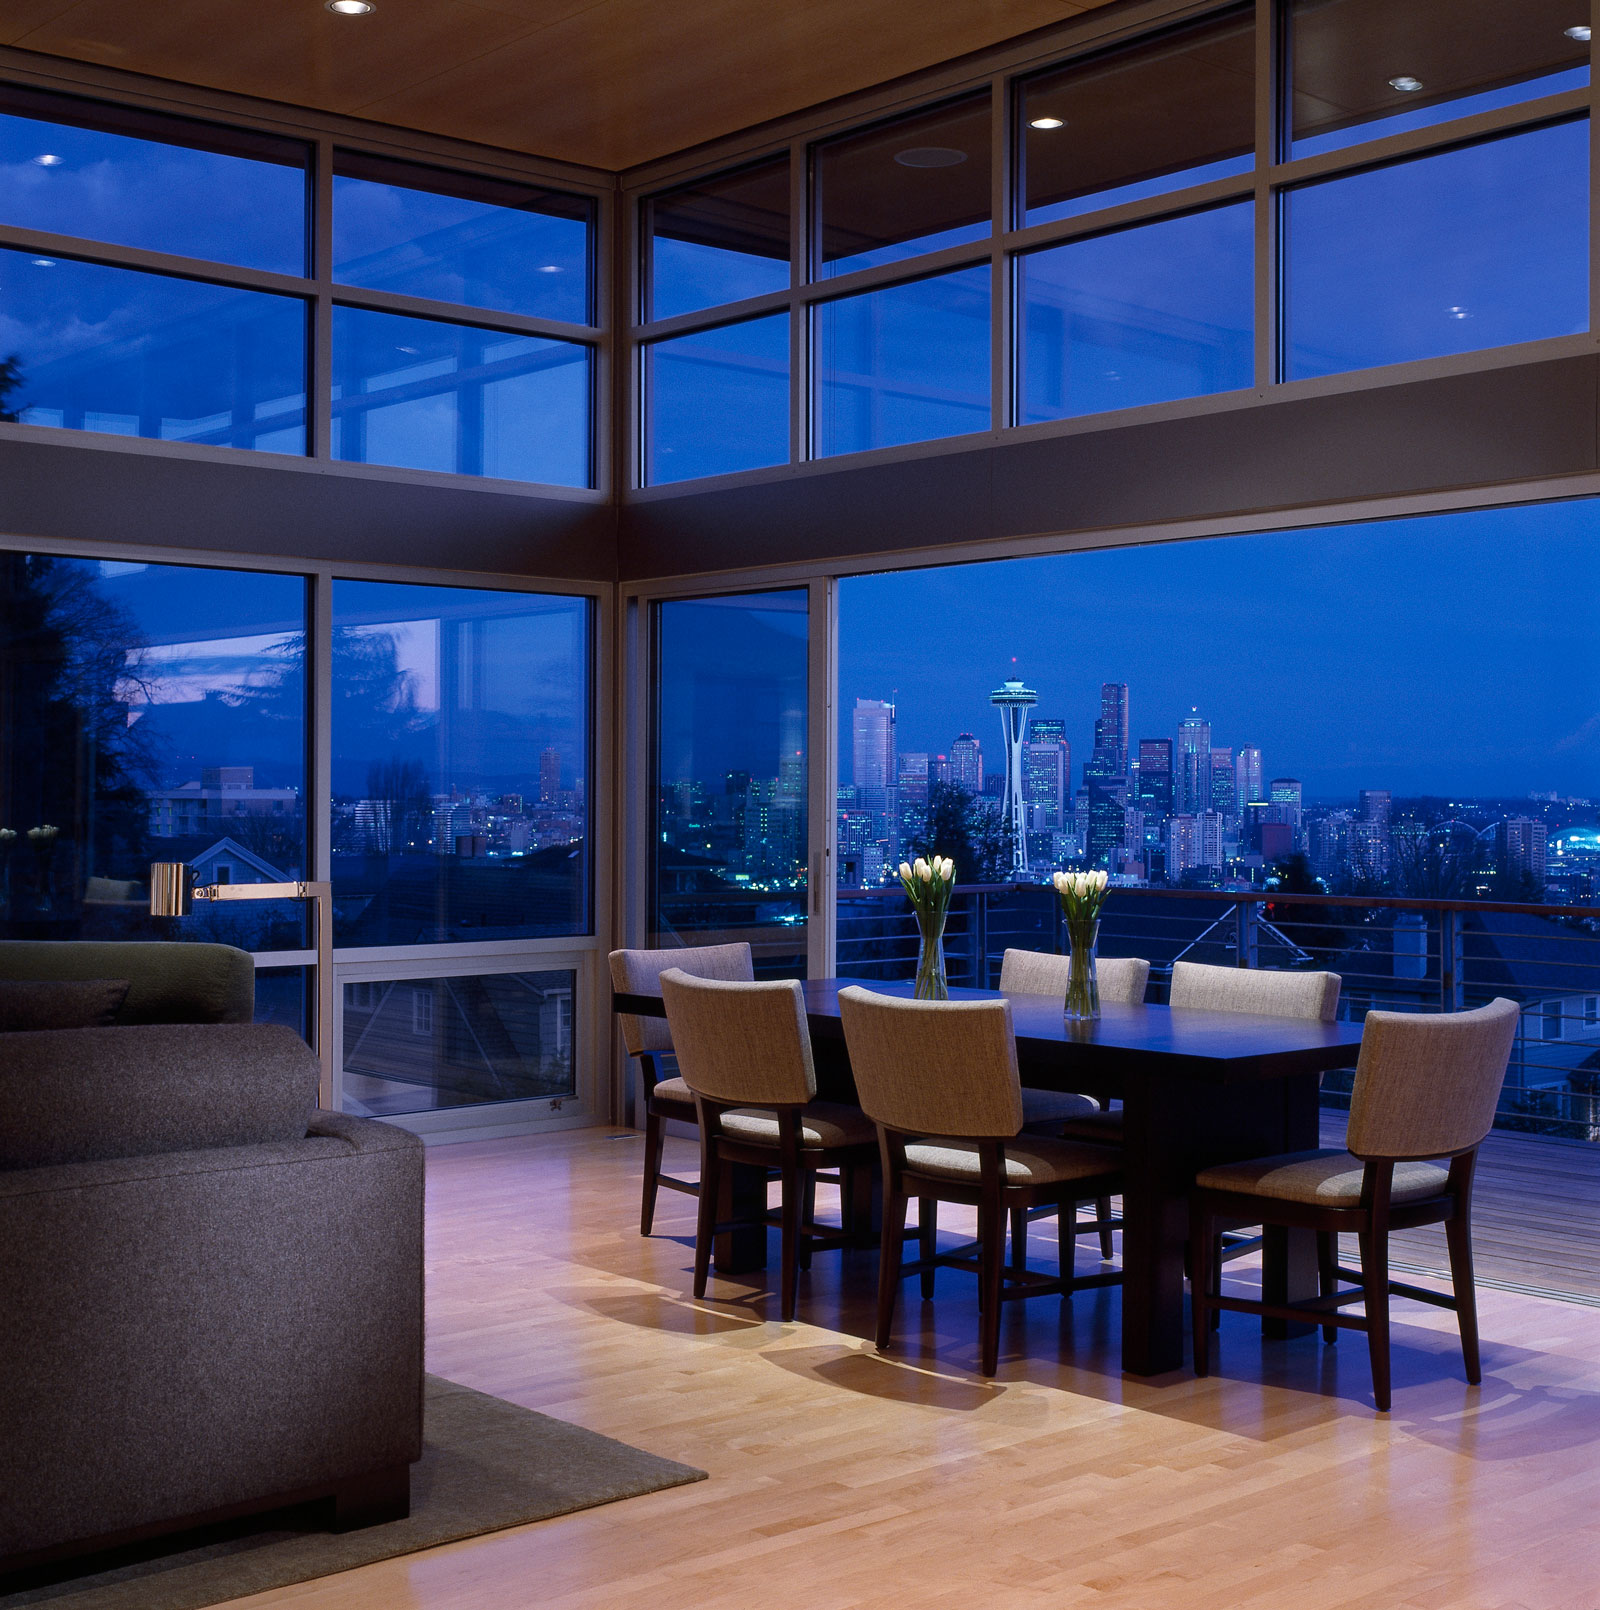 Sheri Olson Architecture - Space Needle View - Seattle Residential Architect